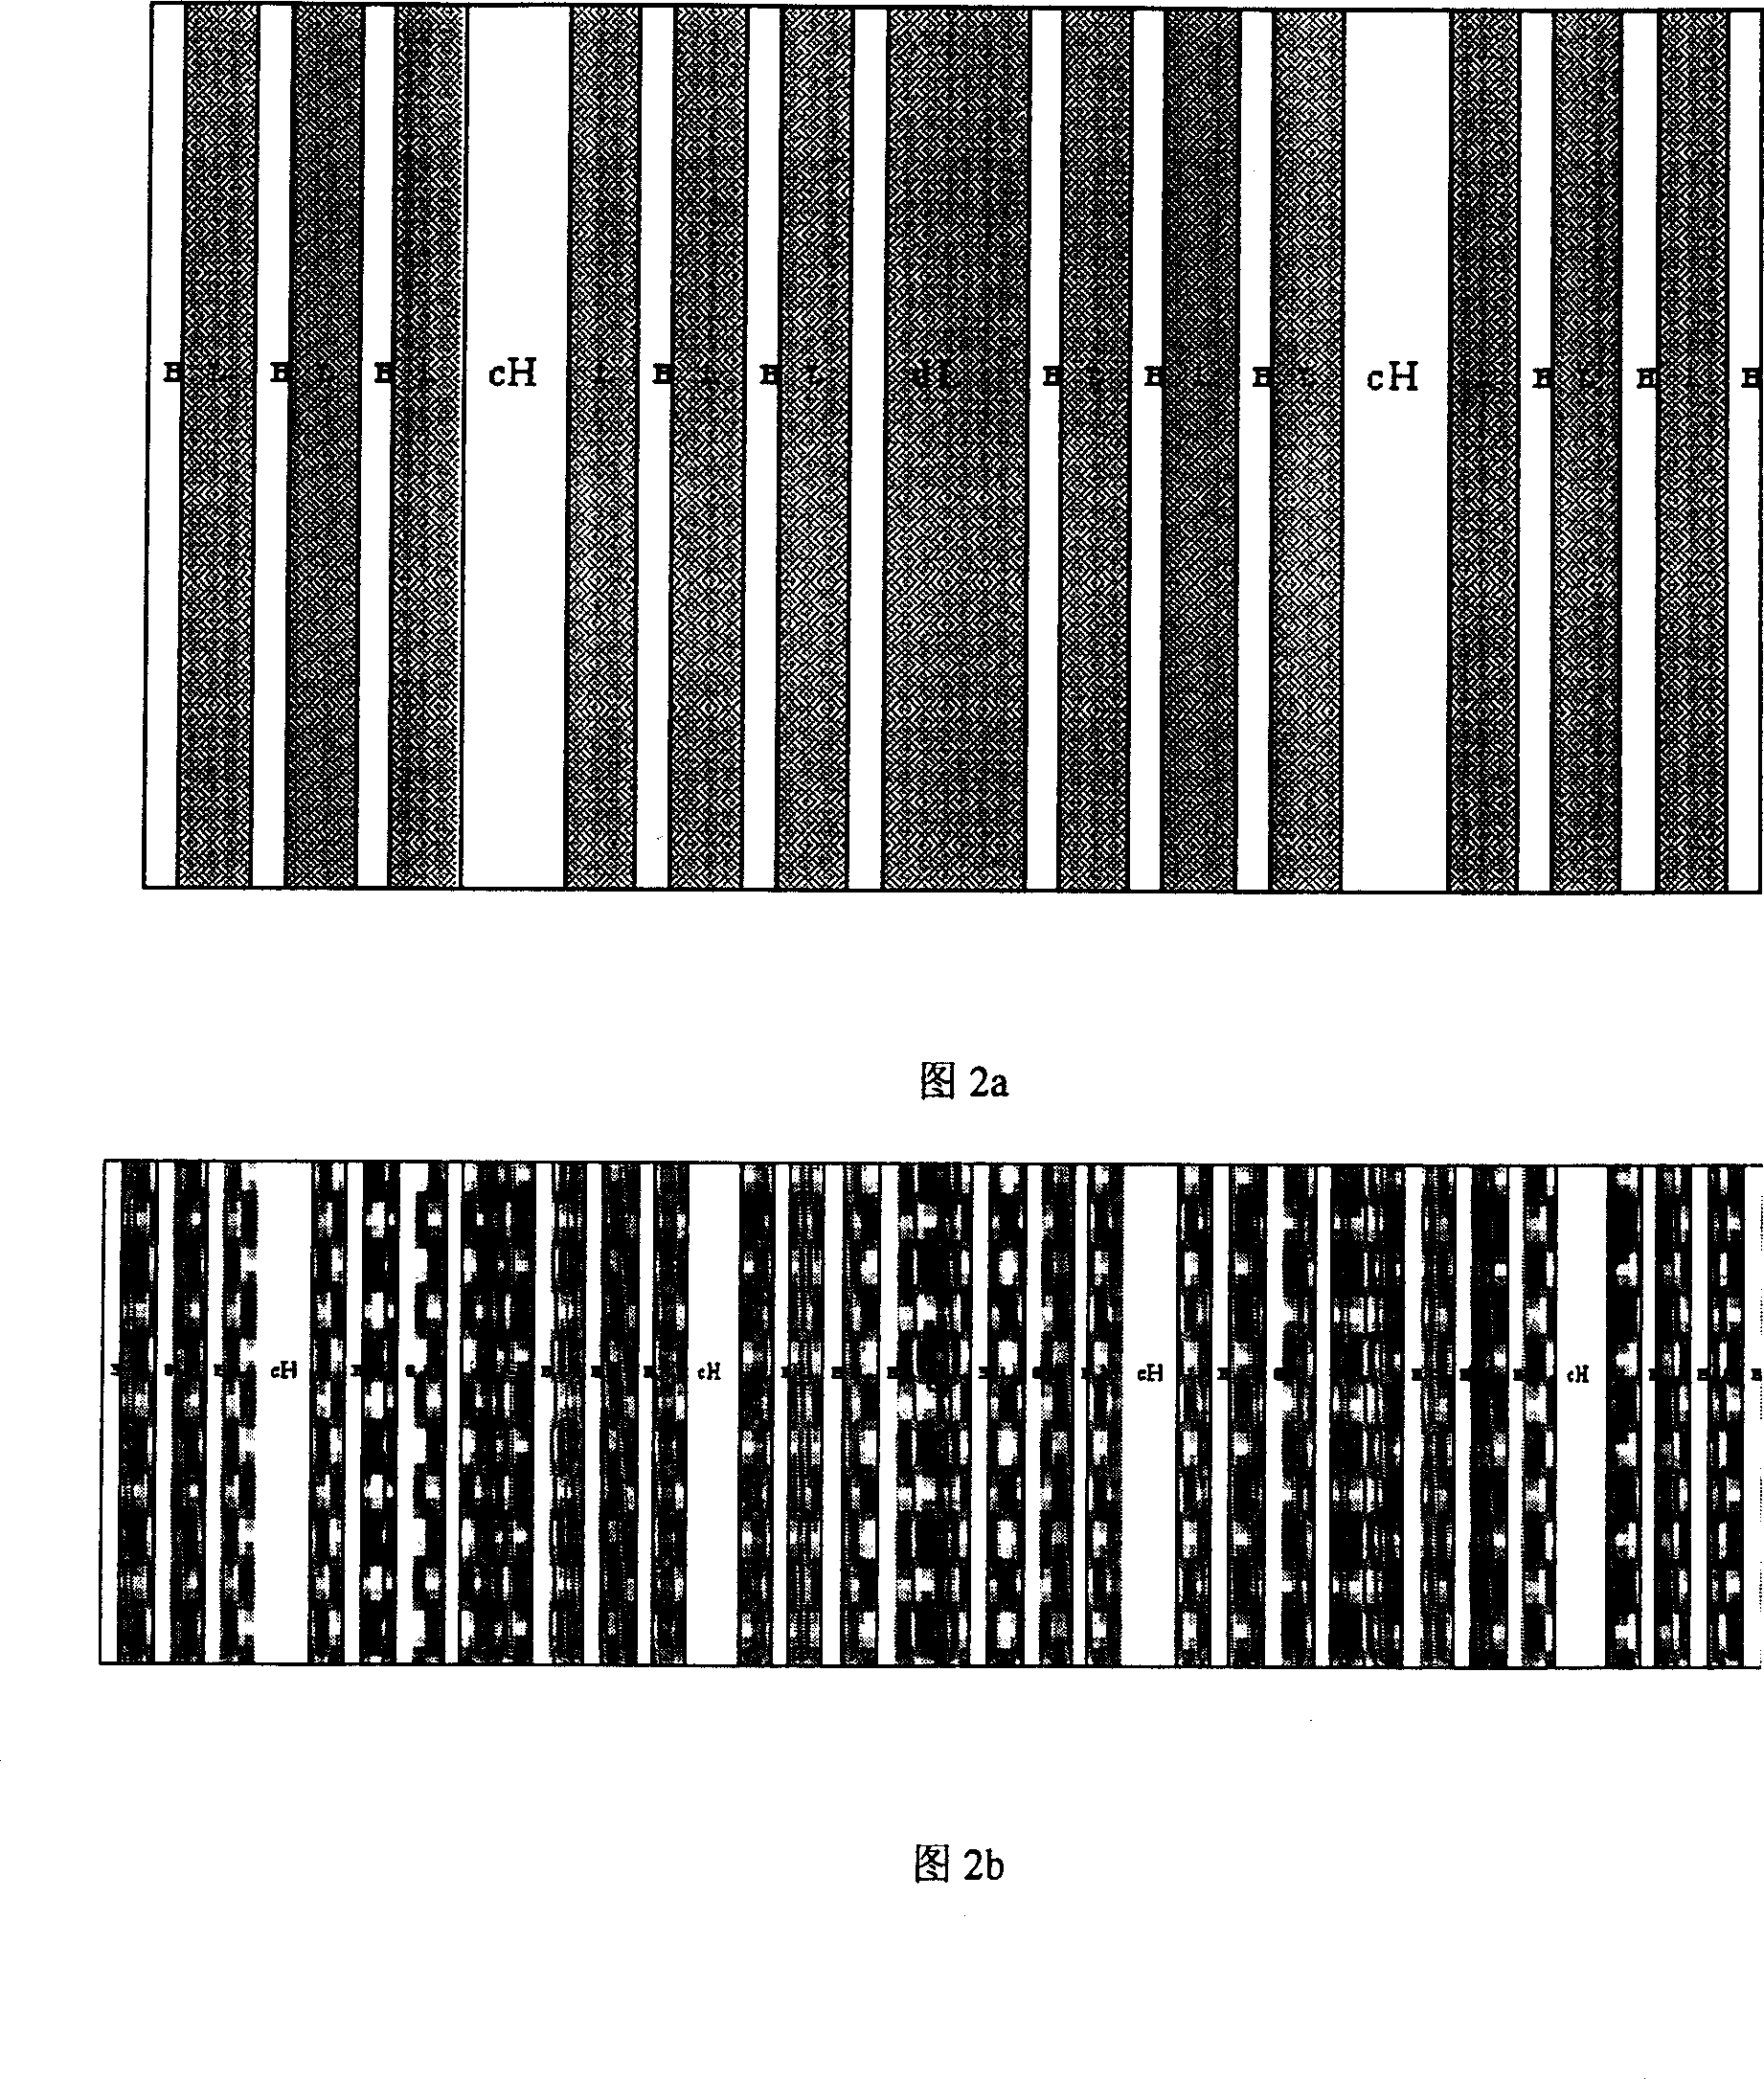 Channel passband relative position independently regulatable one-passband two-channel filter